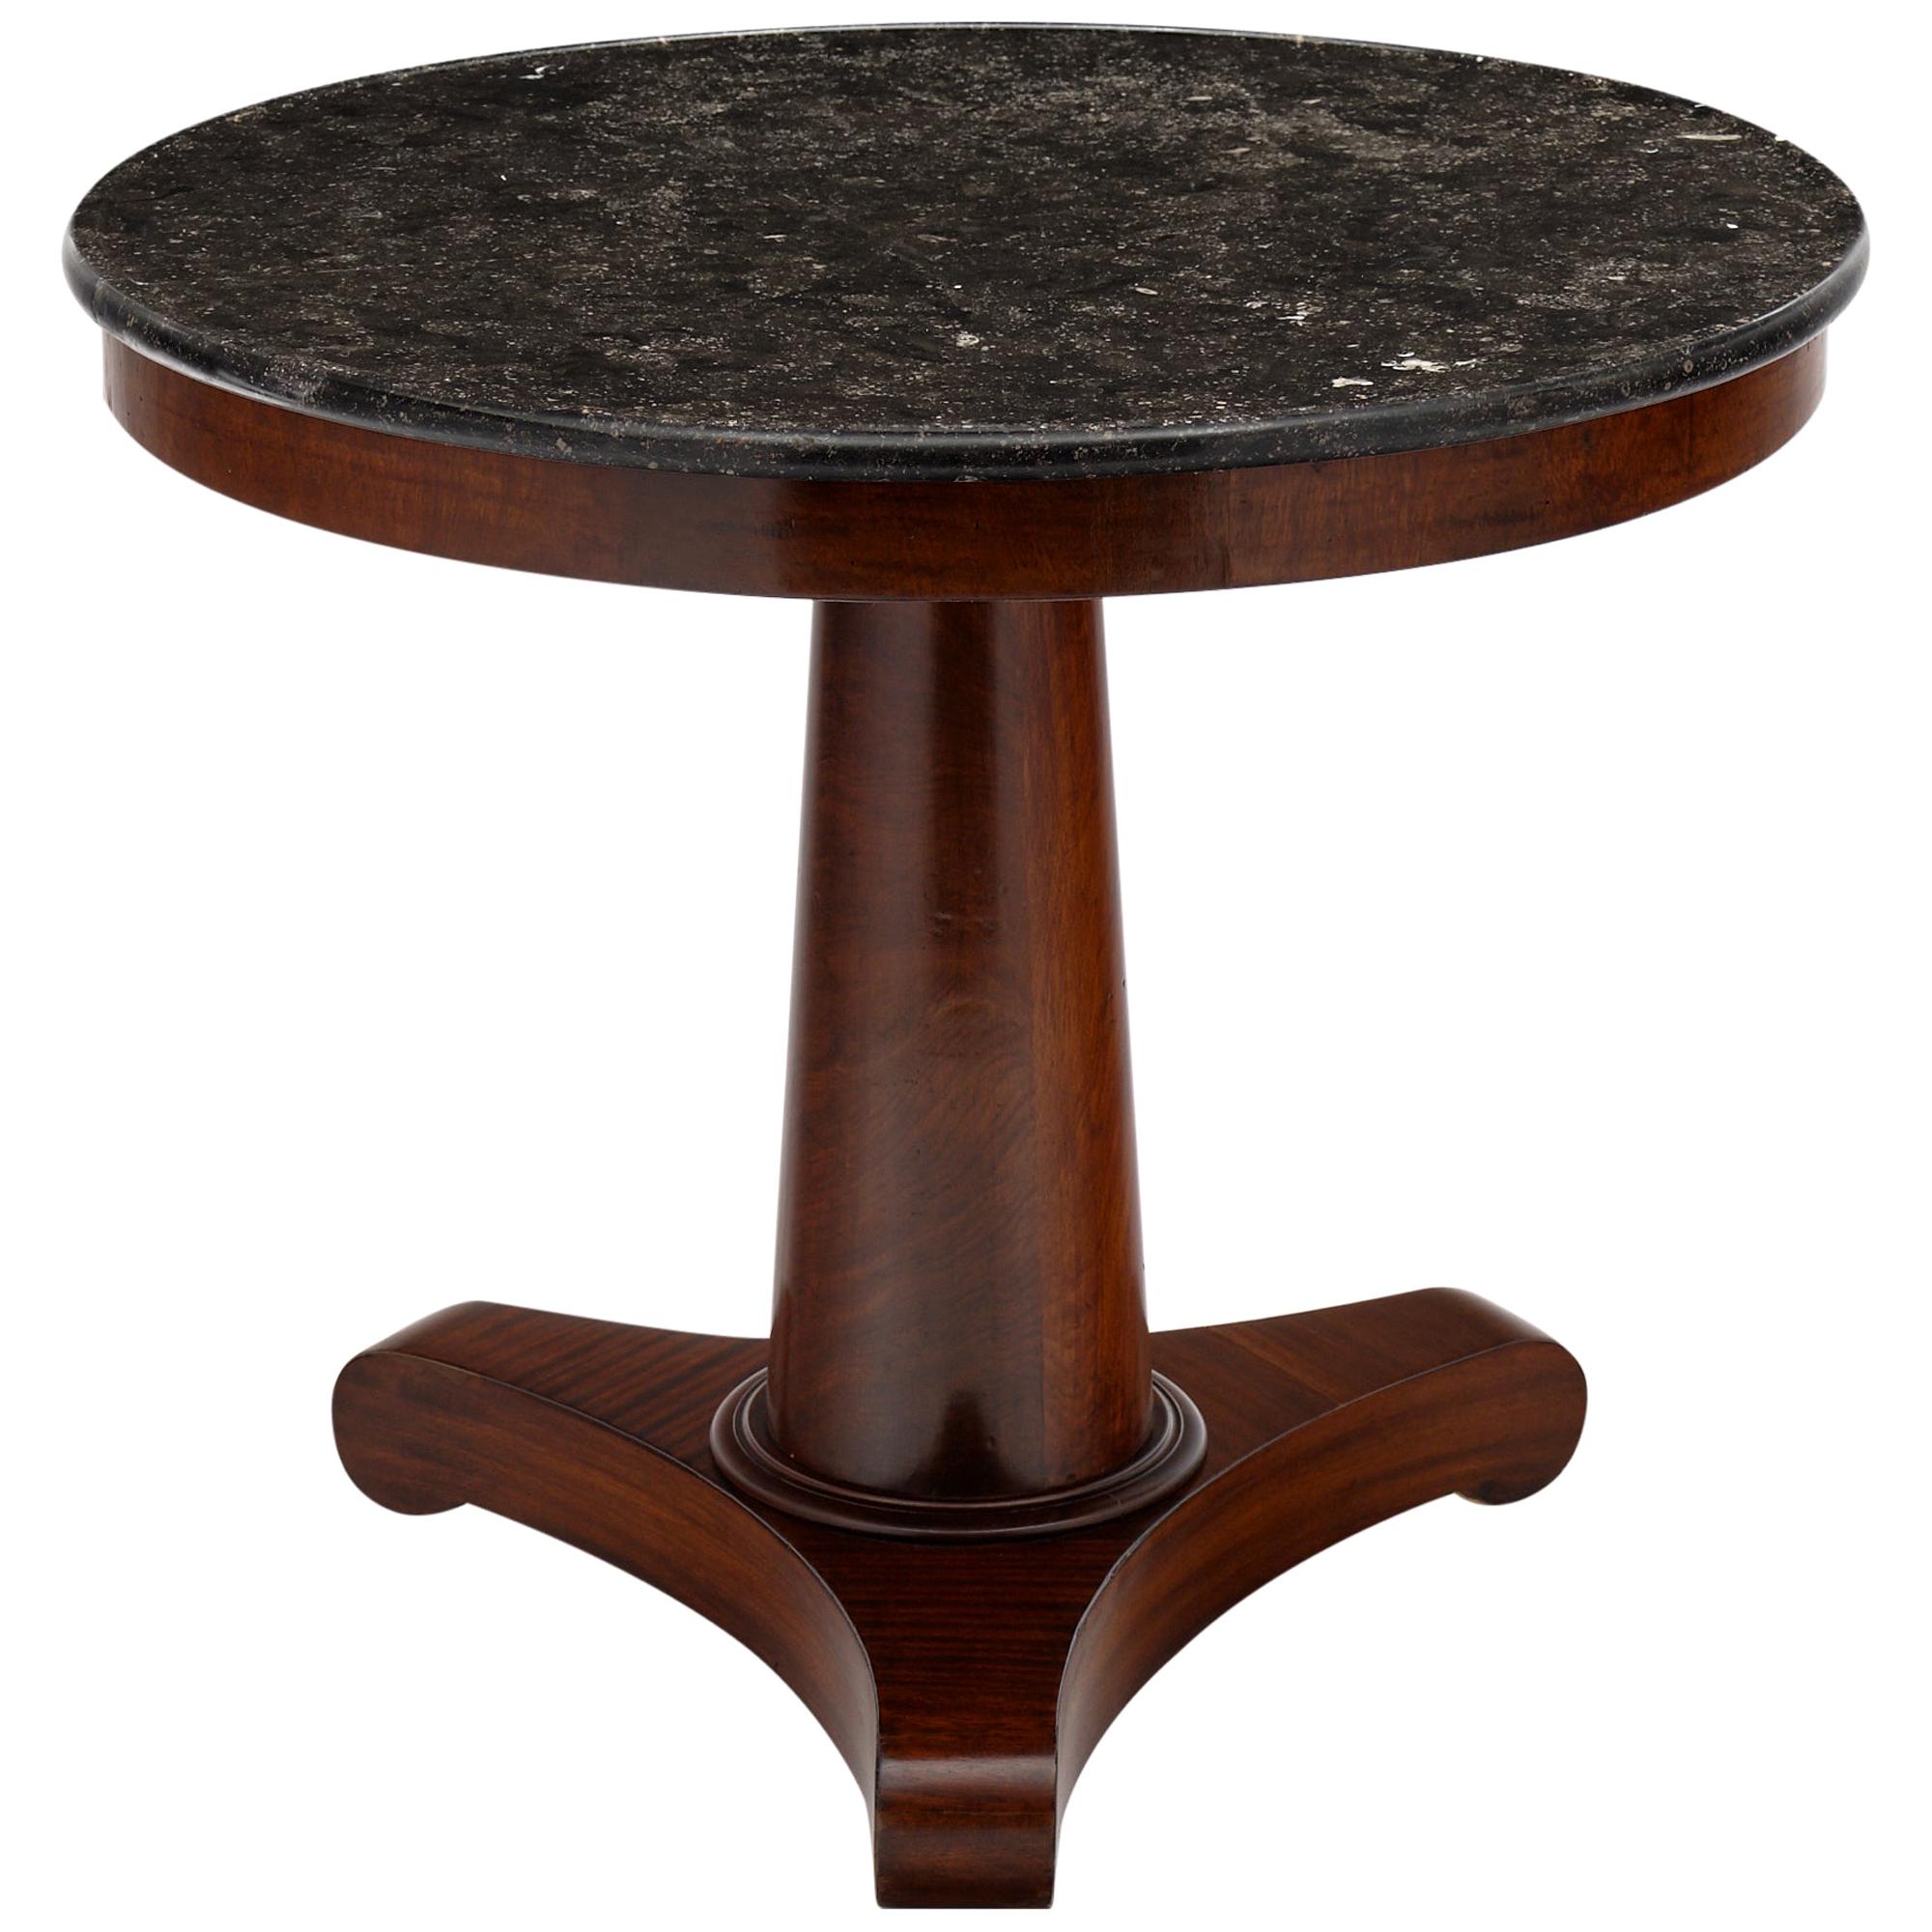 Gray marble topped Empire style gueridon with a beautiful mahogany base. The dark color of the marble is very elegant; and the French polish finish of the base adds a sophisticated luster. We love the classic style and elegant details. The marble